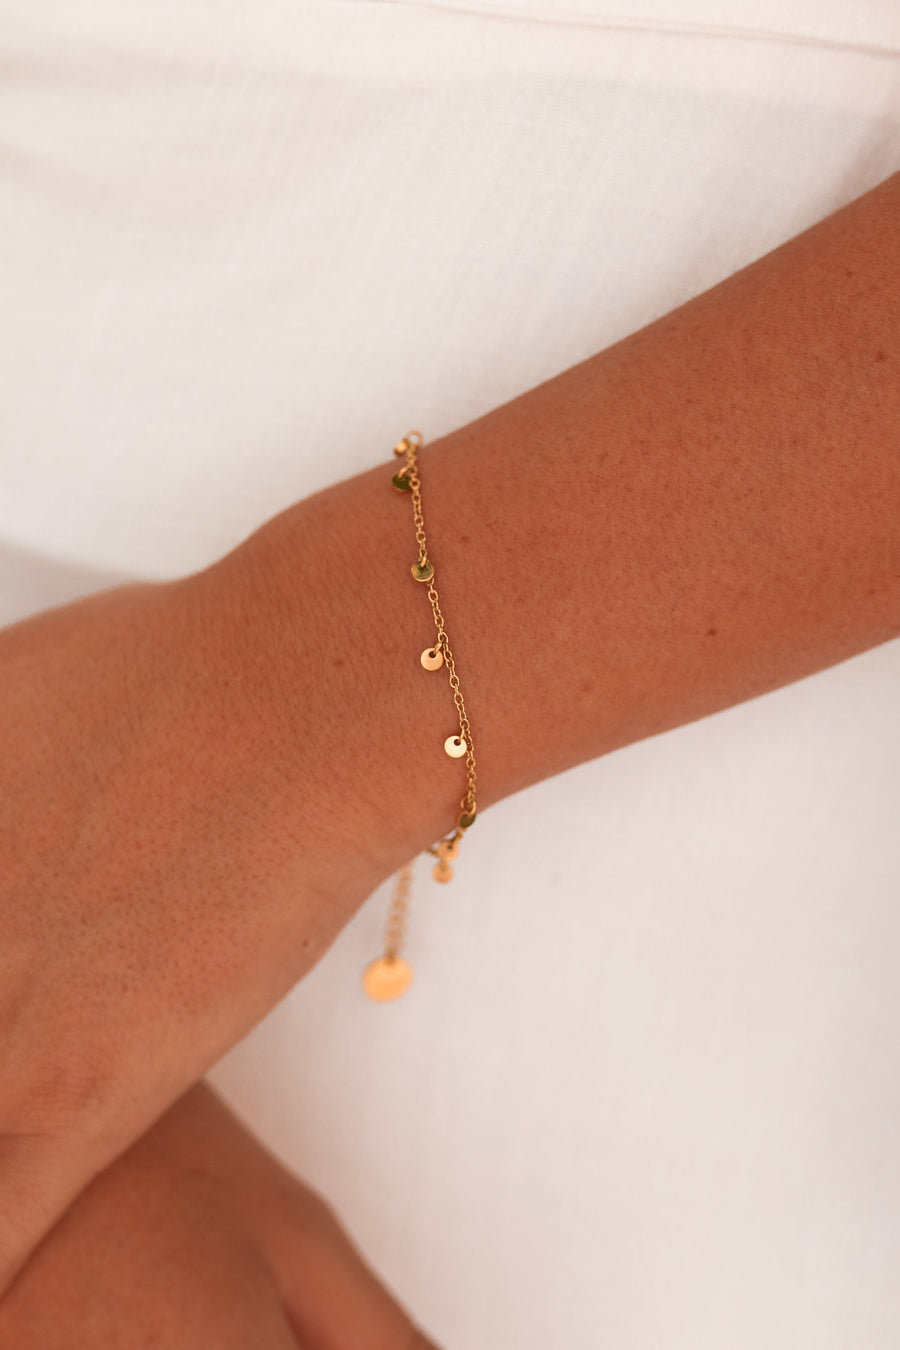 Trinity - Gold or Silver Stainless Steel Bracelet